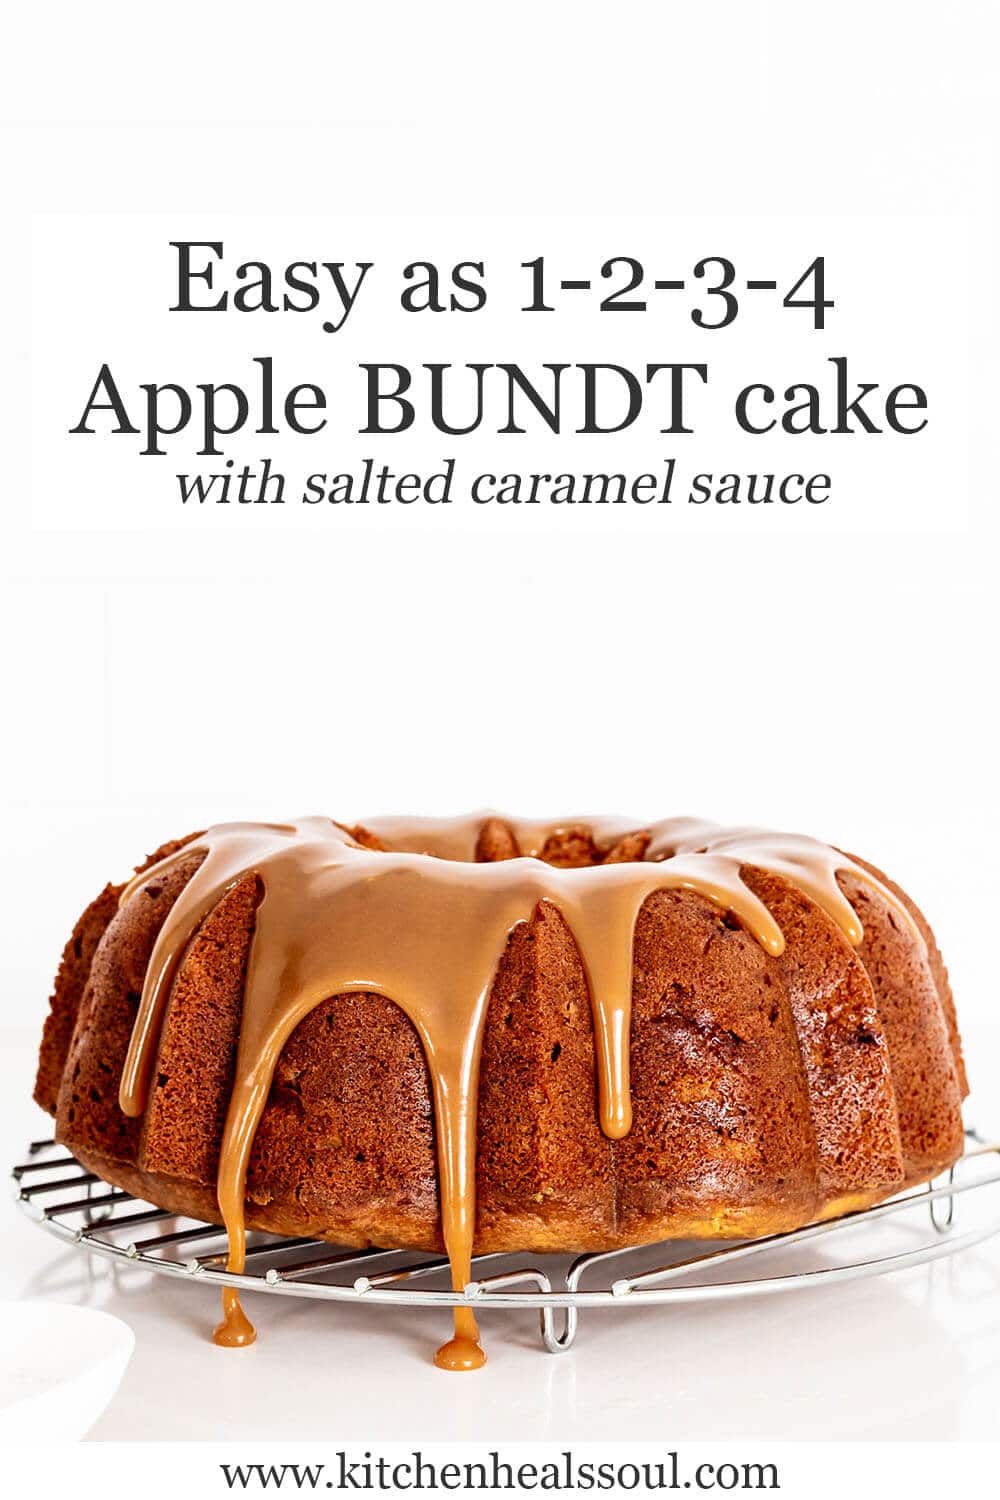 Easy as 1-2-3-4 apple bundt cake drizzled with salted caramel sauce, set over a wire rack